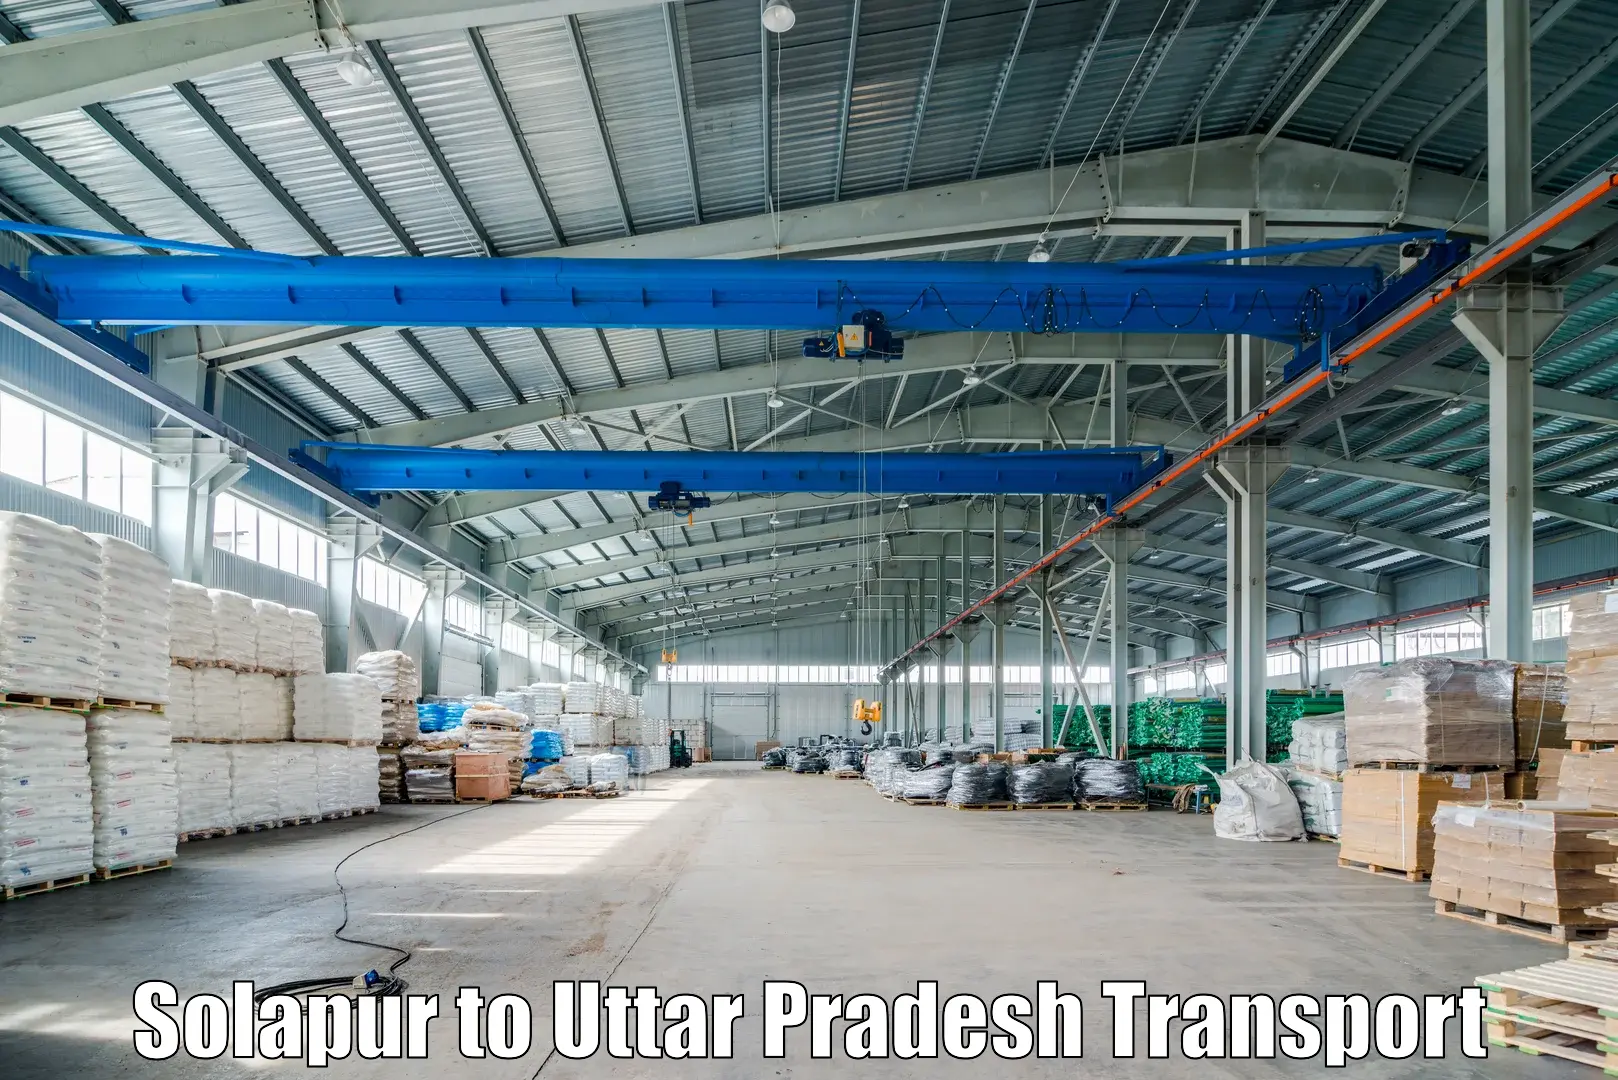 Transport bike from one state to another Solapur to Uttar Pradesh